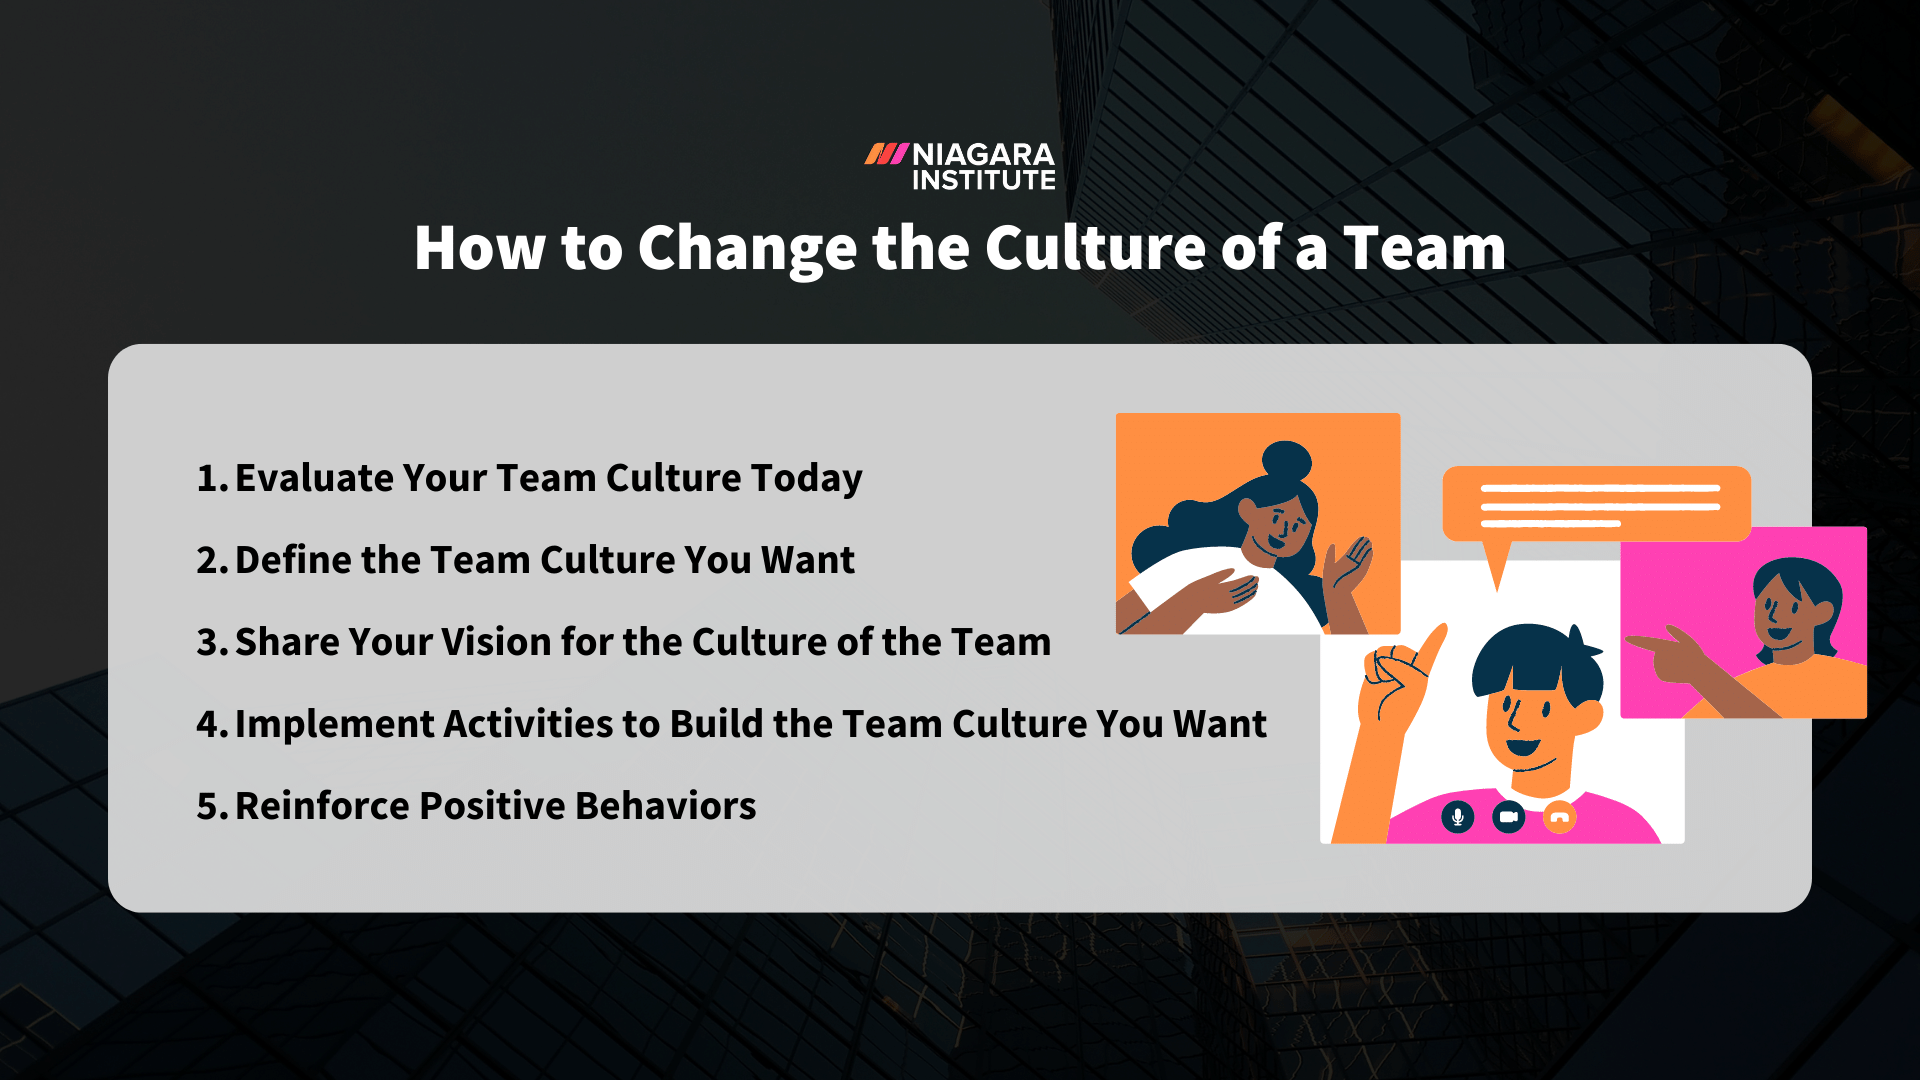 How To Change The Culture of a Team | A 5-Step Process